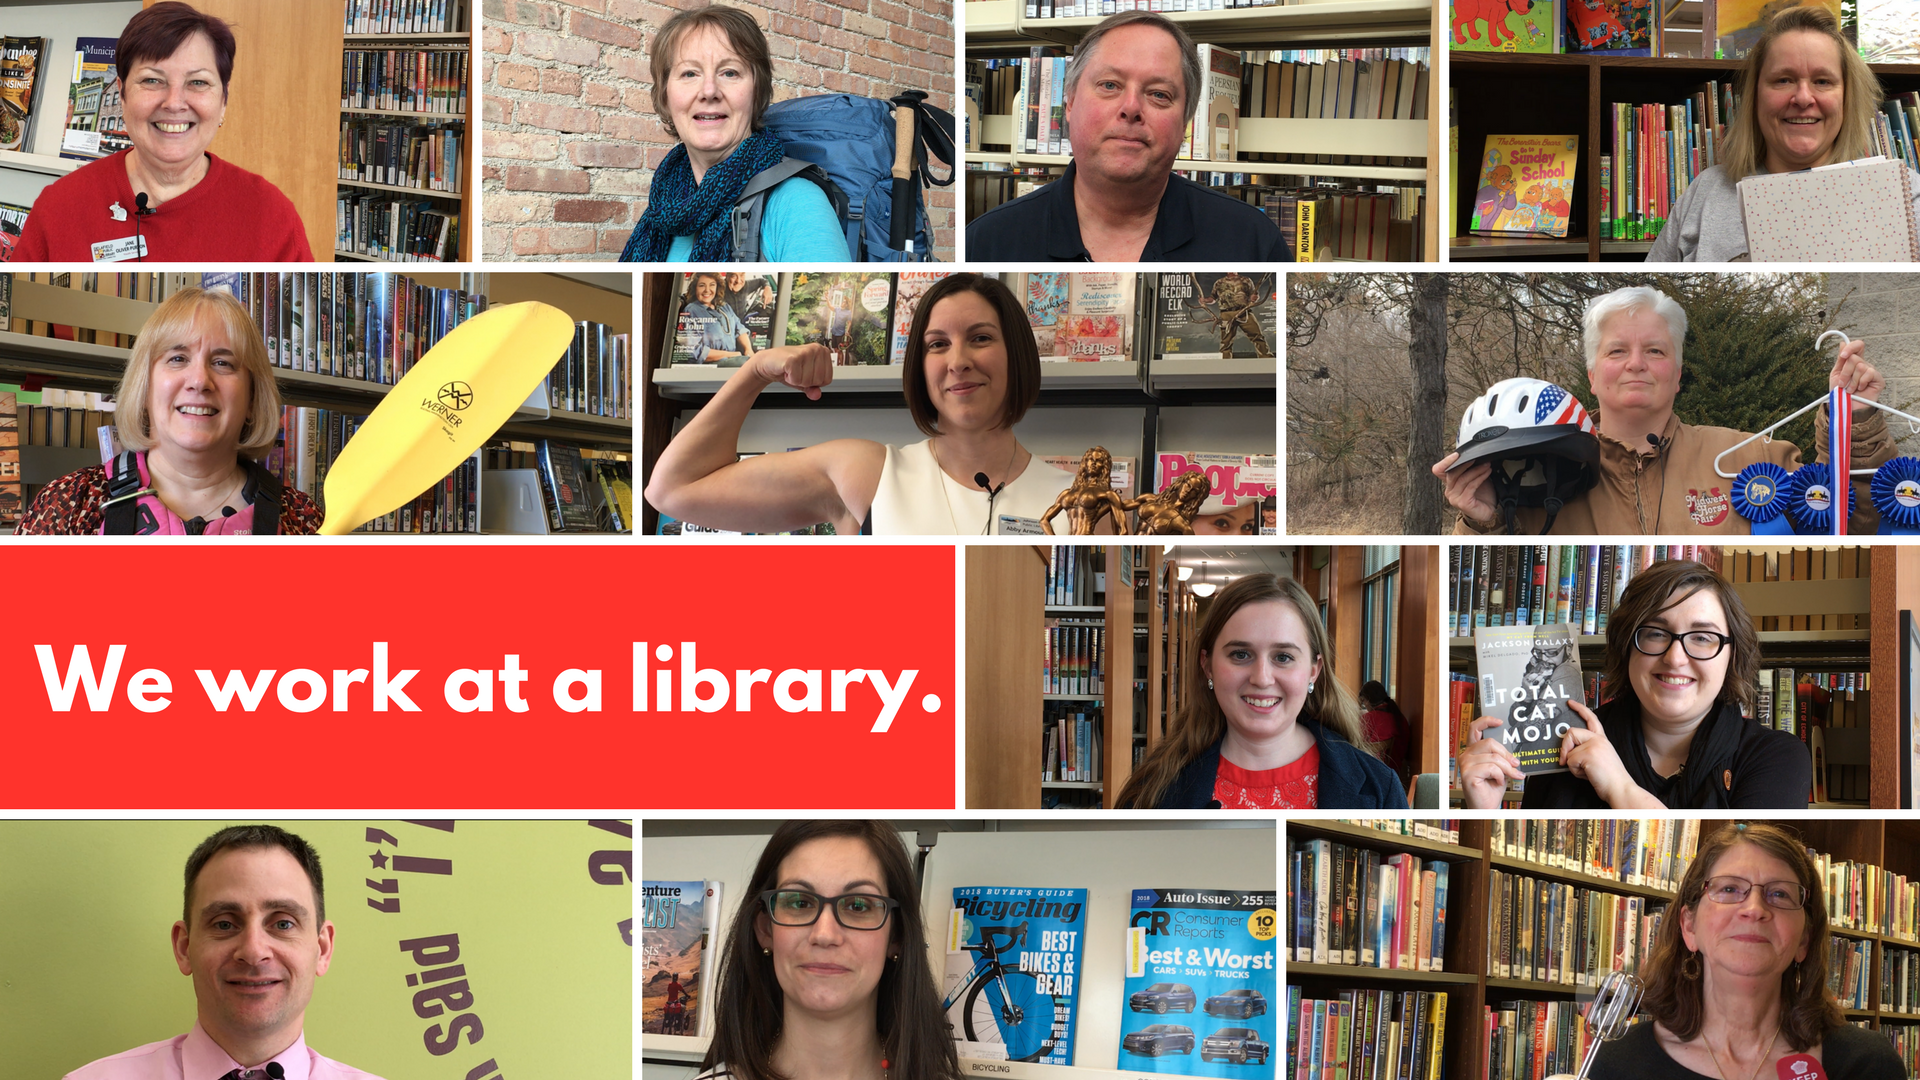 Collage of photos of library workers with caption "We Work At a Library"